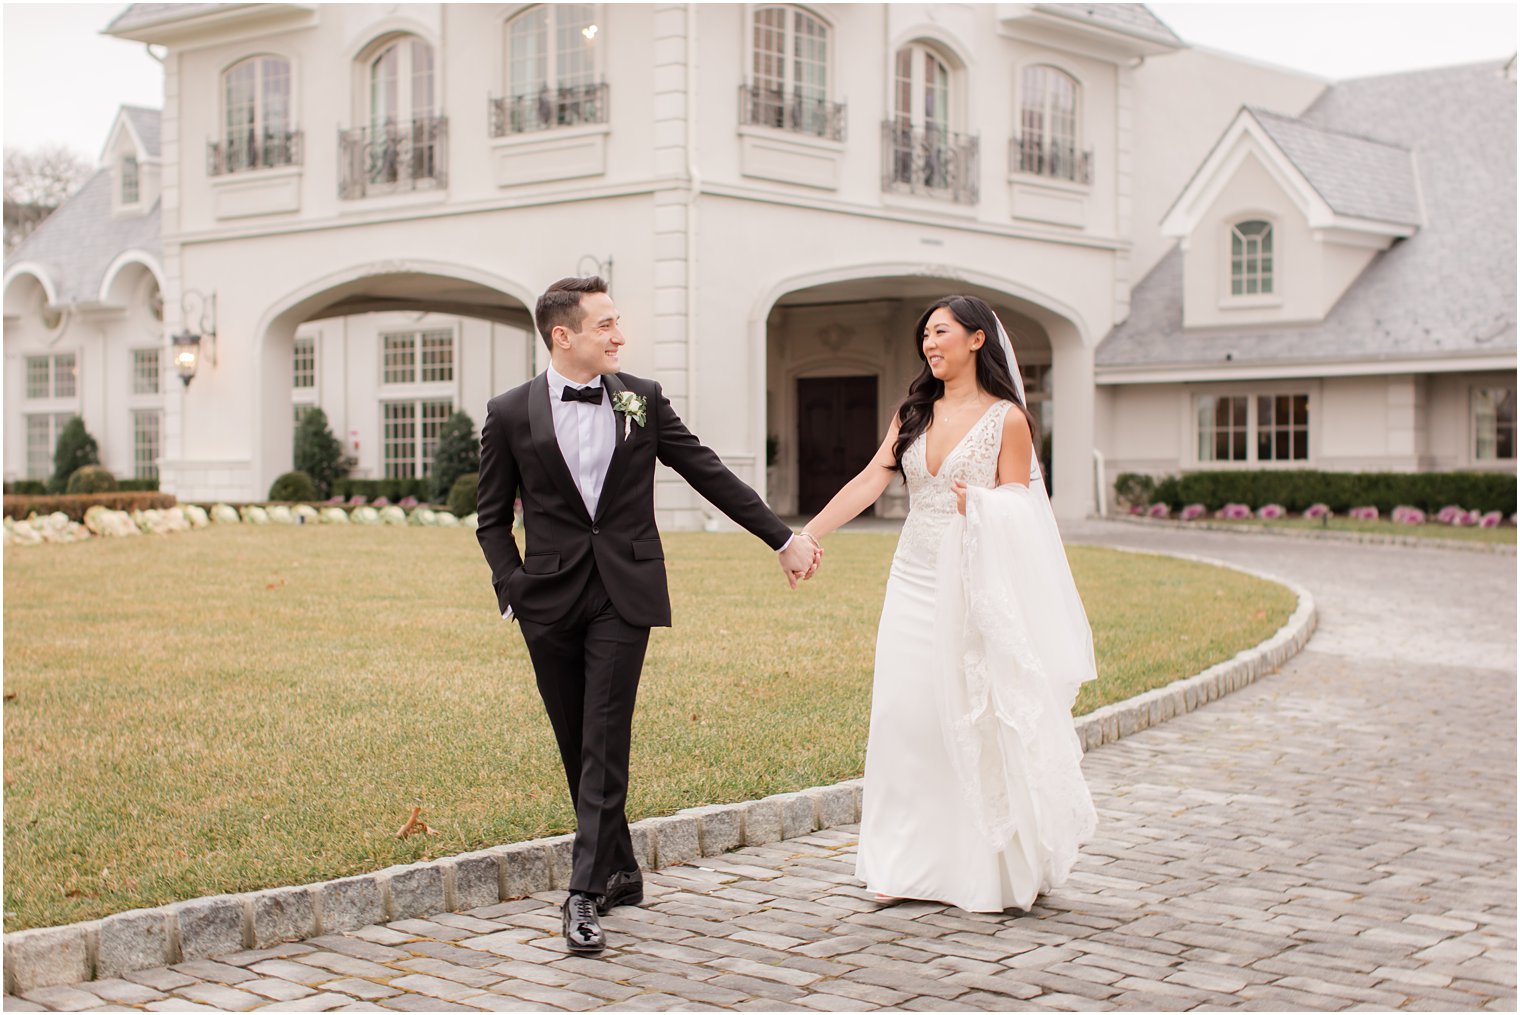 Formal bride and groom portraits on wedding day at Park Chateau Estate